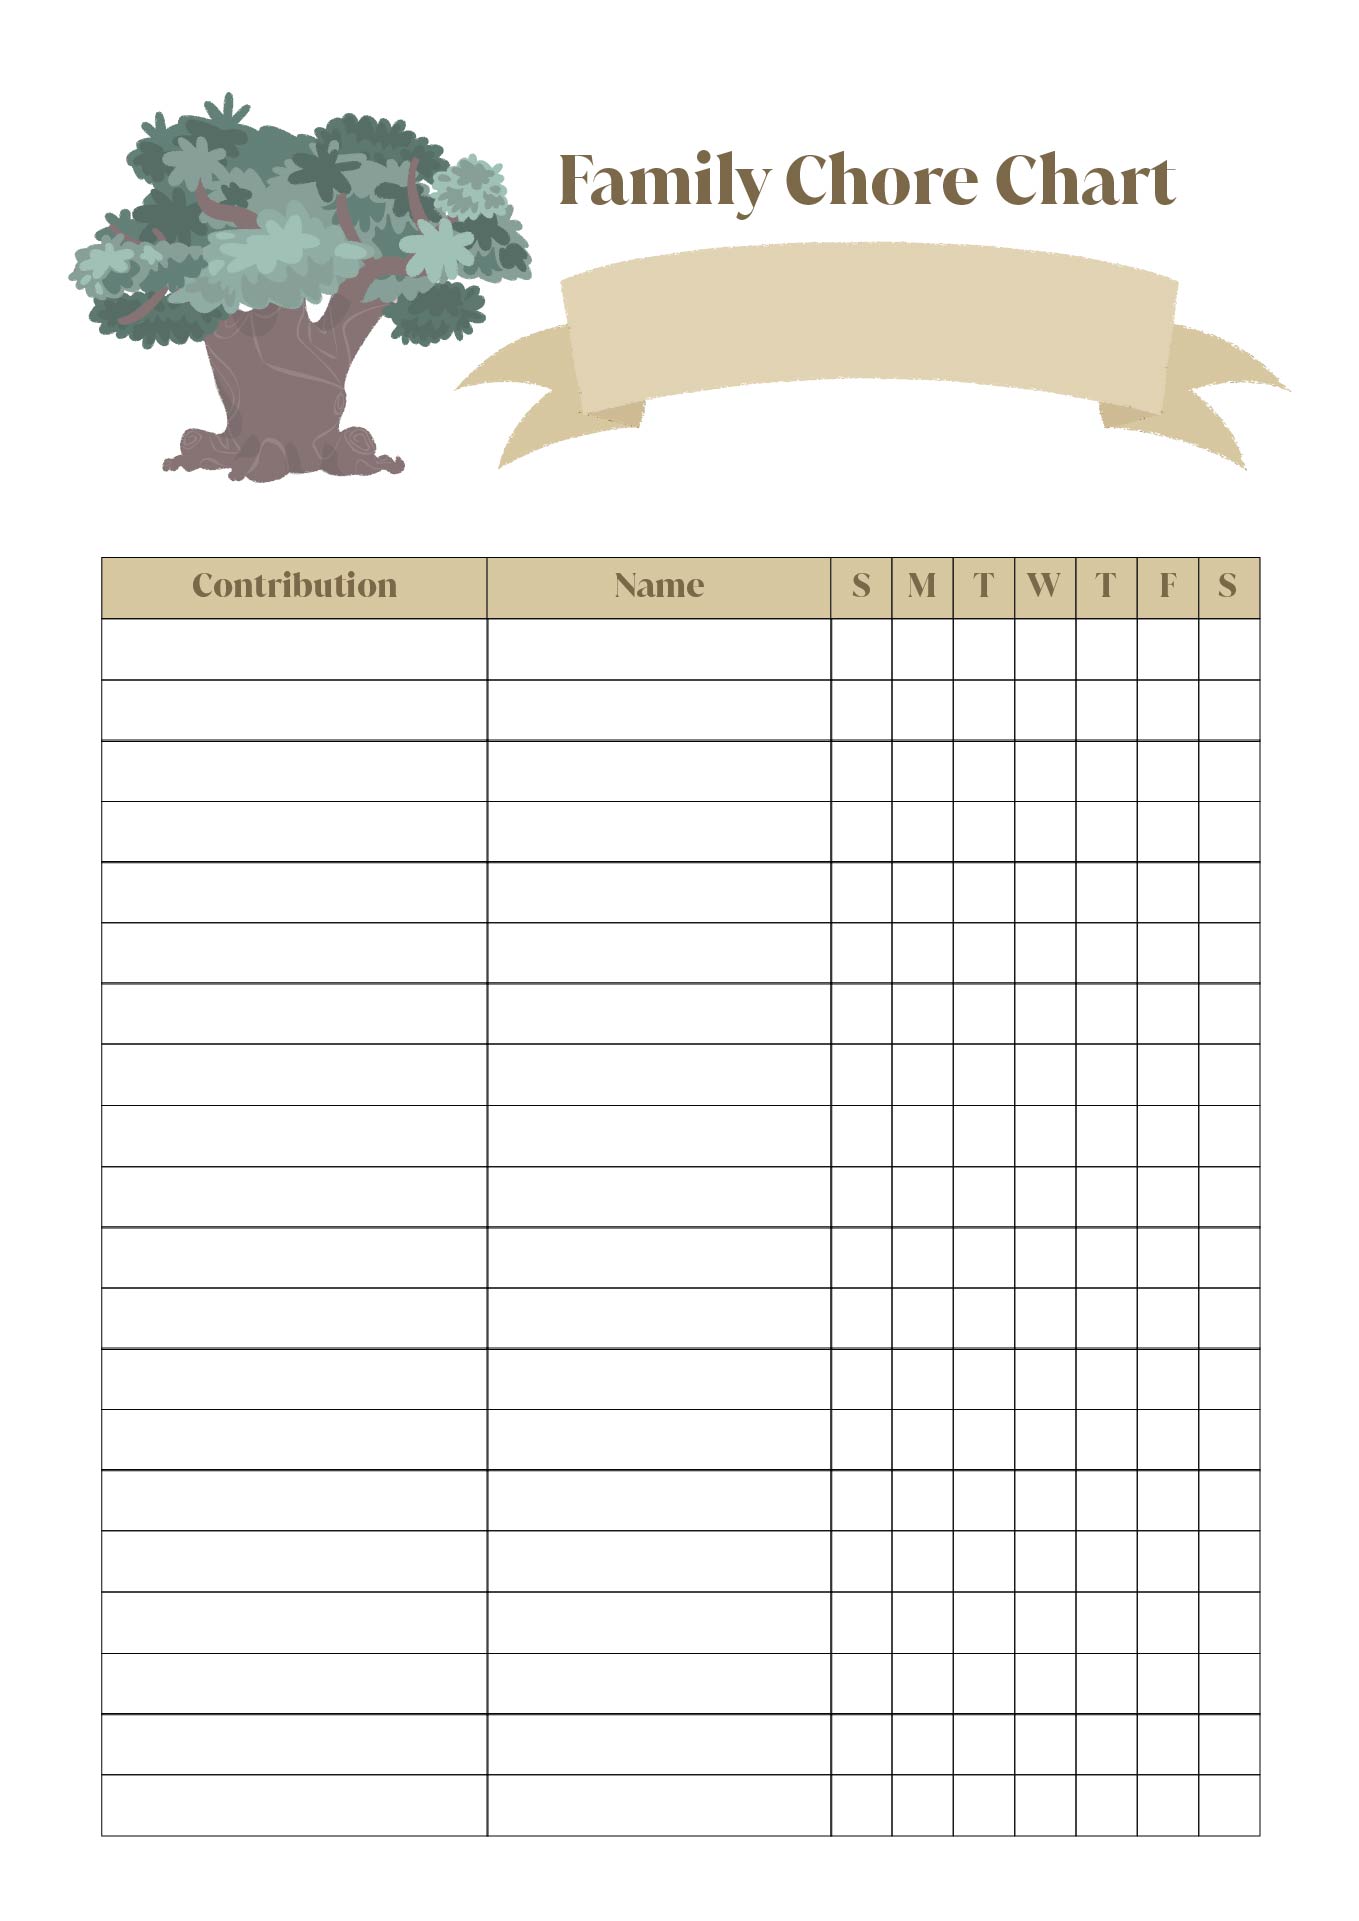 To Do List For Home Chores Chores Daily Weekly Chore List Chart 